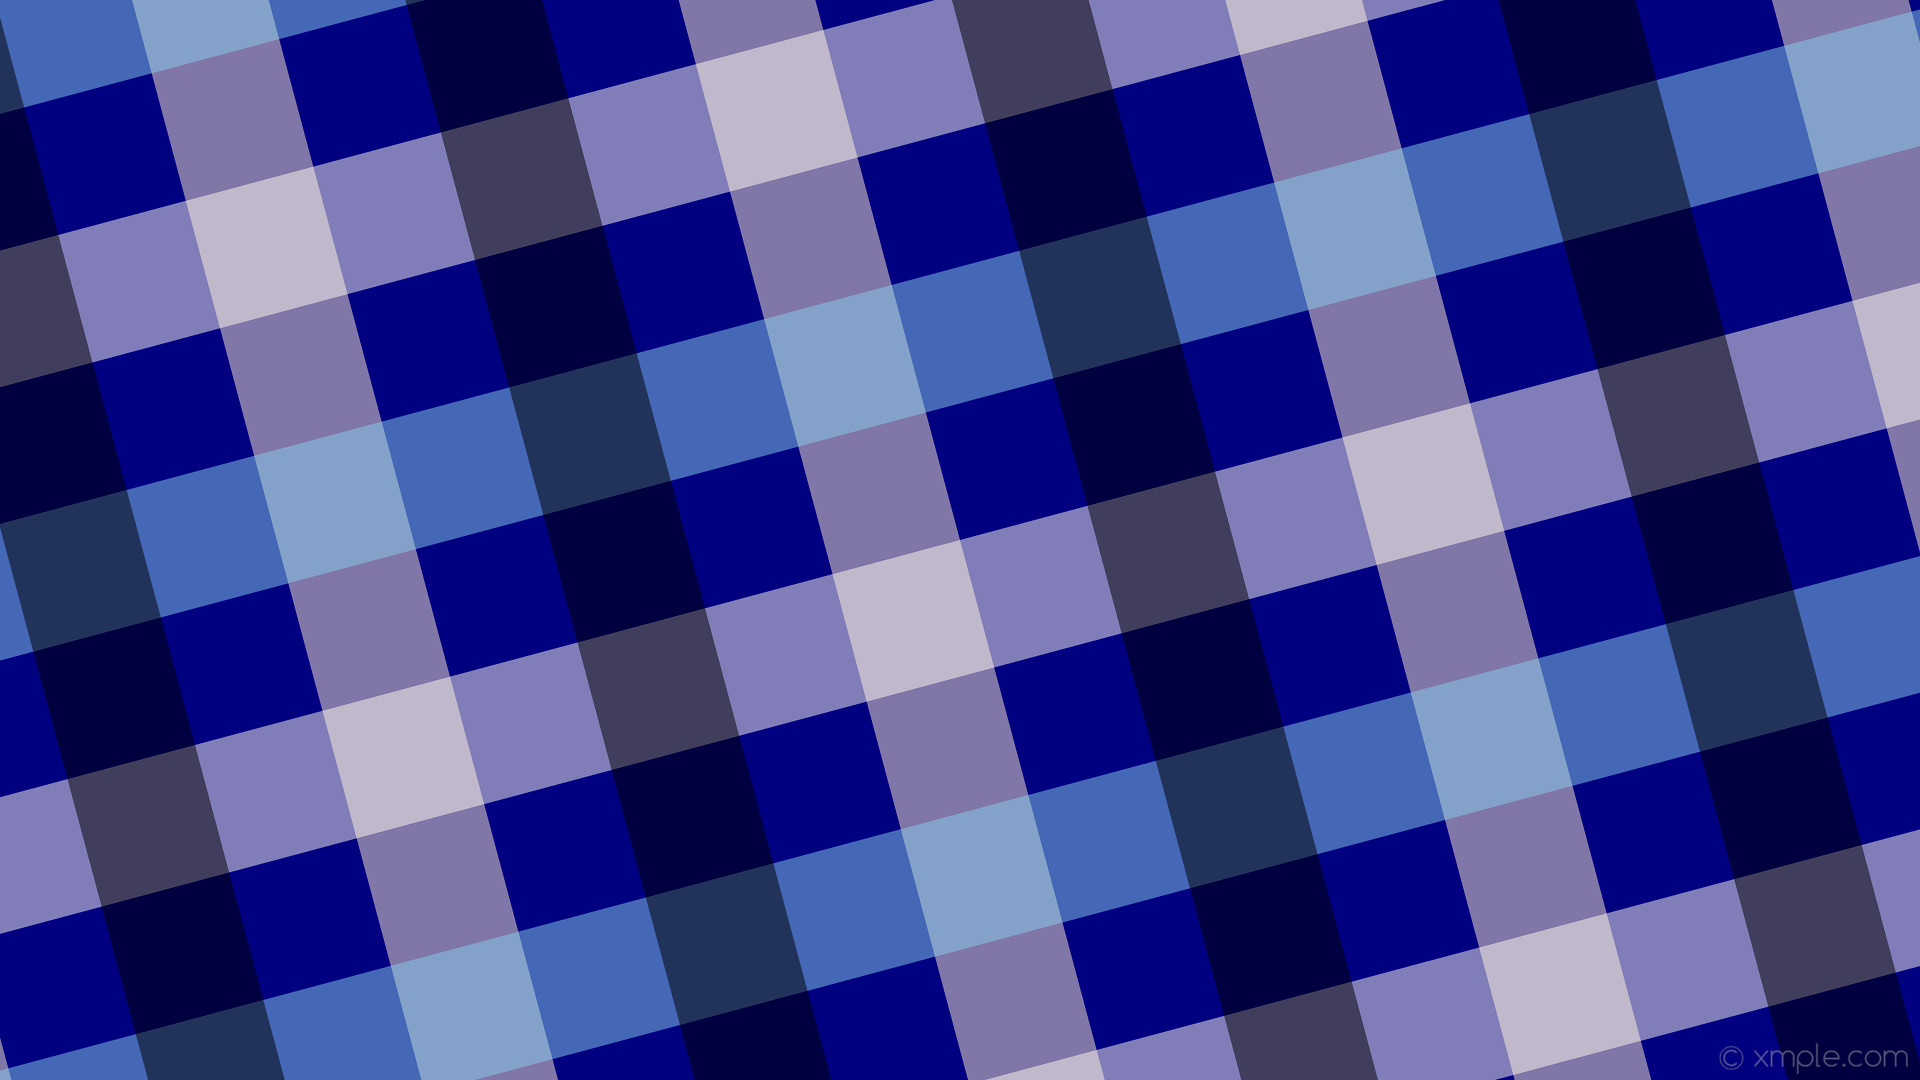 1920x1080 wallpaper black gingham white blue brown striped penta navy blanched almond  floral white sky blue #